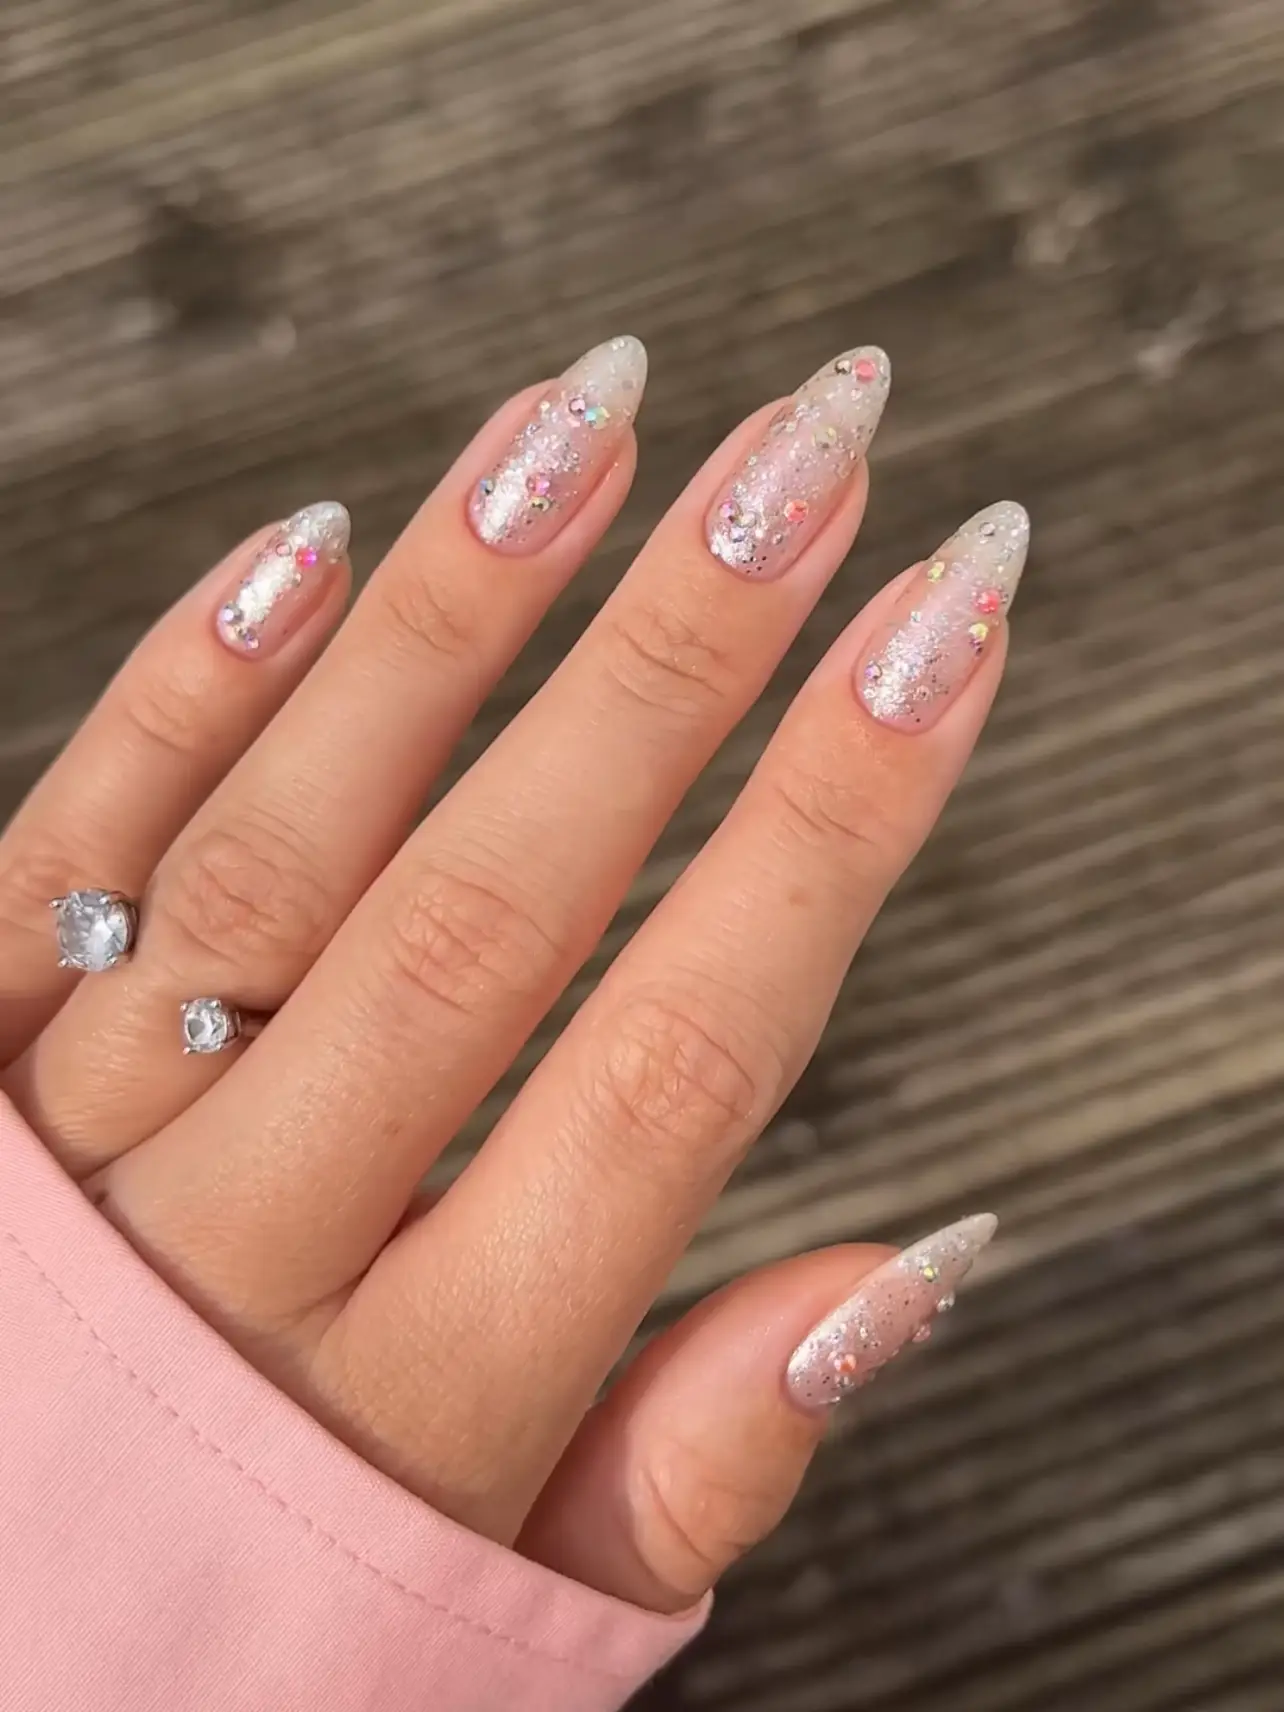 How to apply nail art gems/crystals💎💖